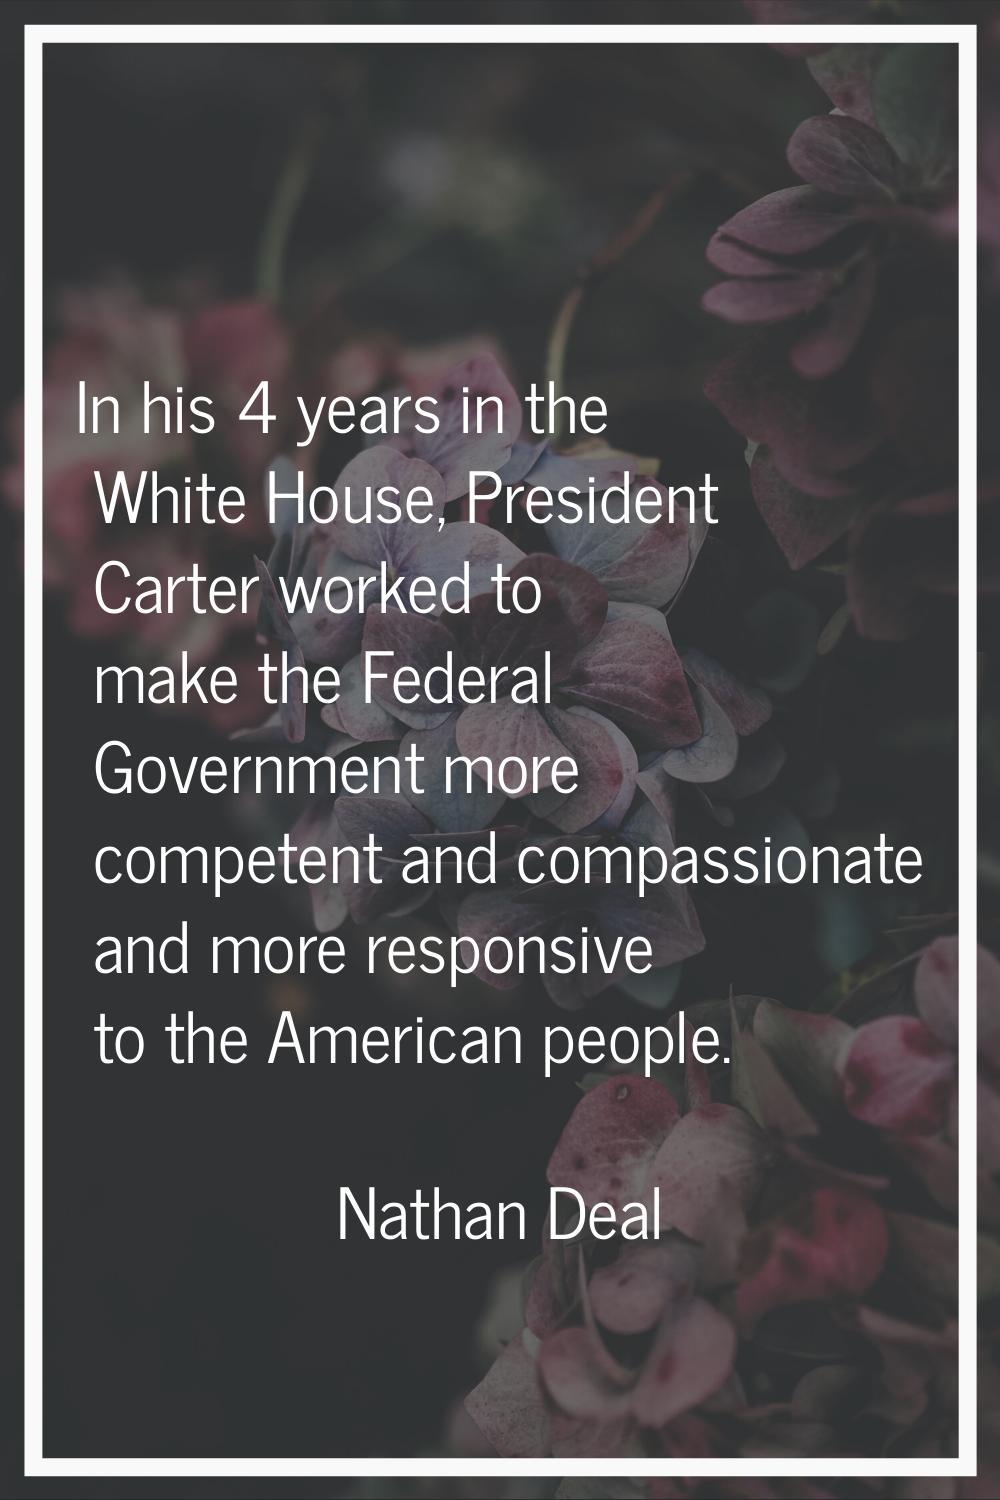 In his 4 years in the White House, President Carter worked to make the Federal Government more comp